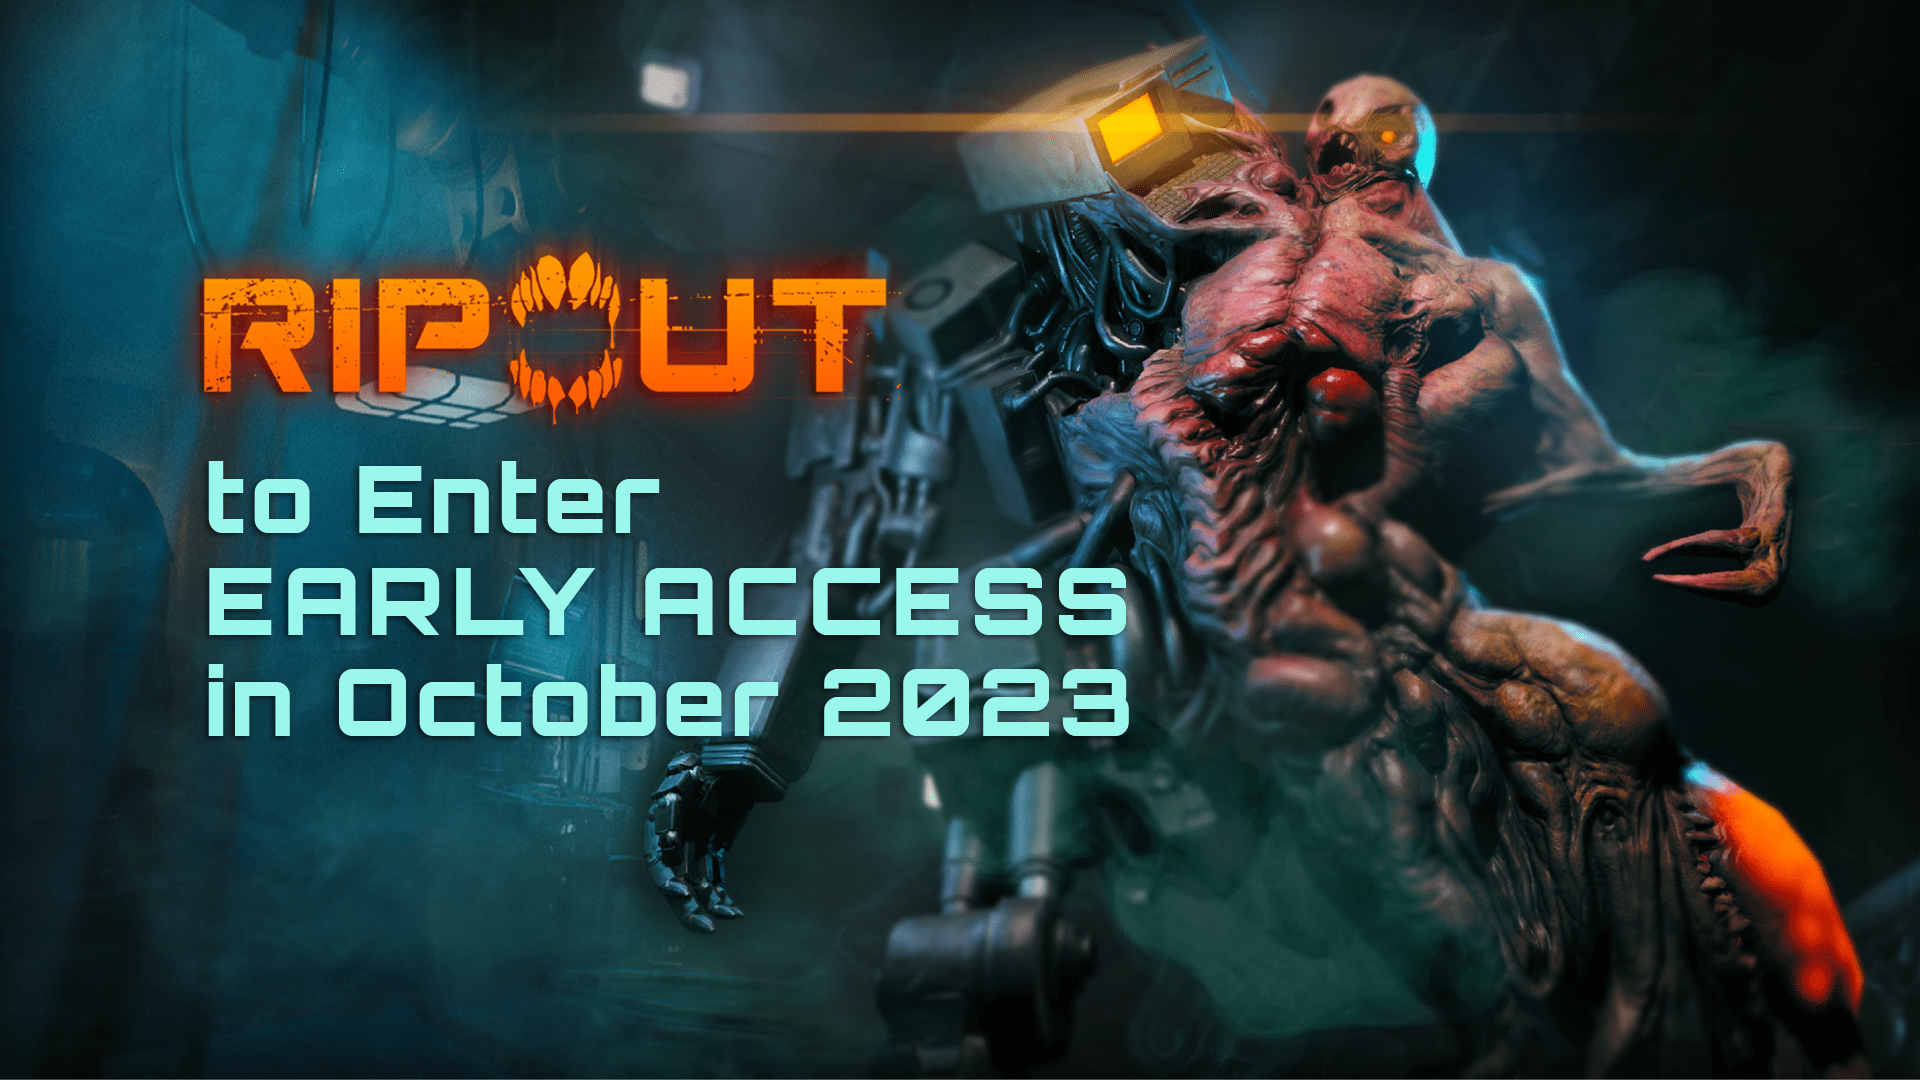 ripout to enter early access in october 2023